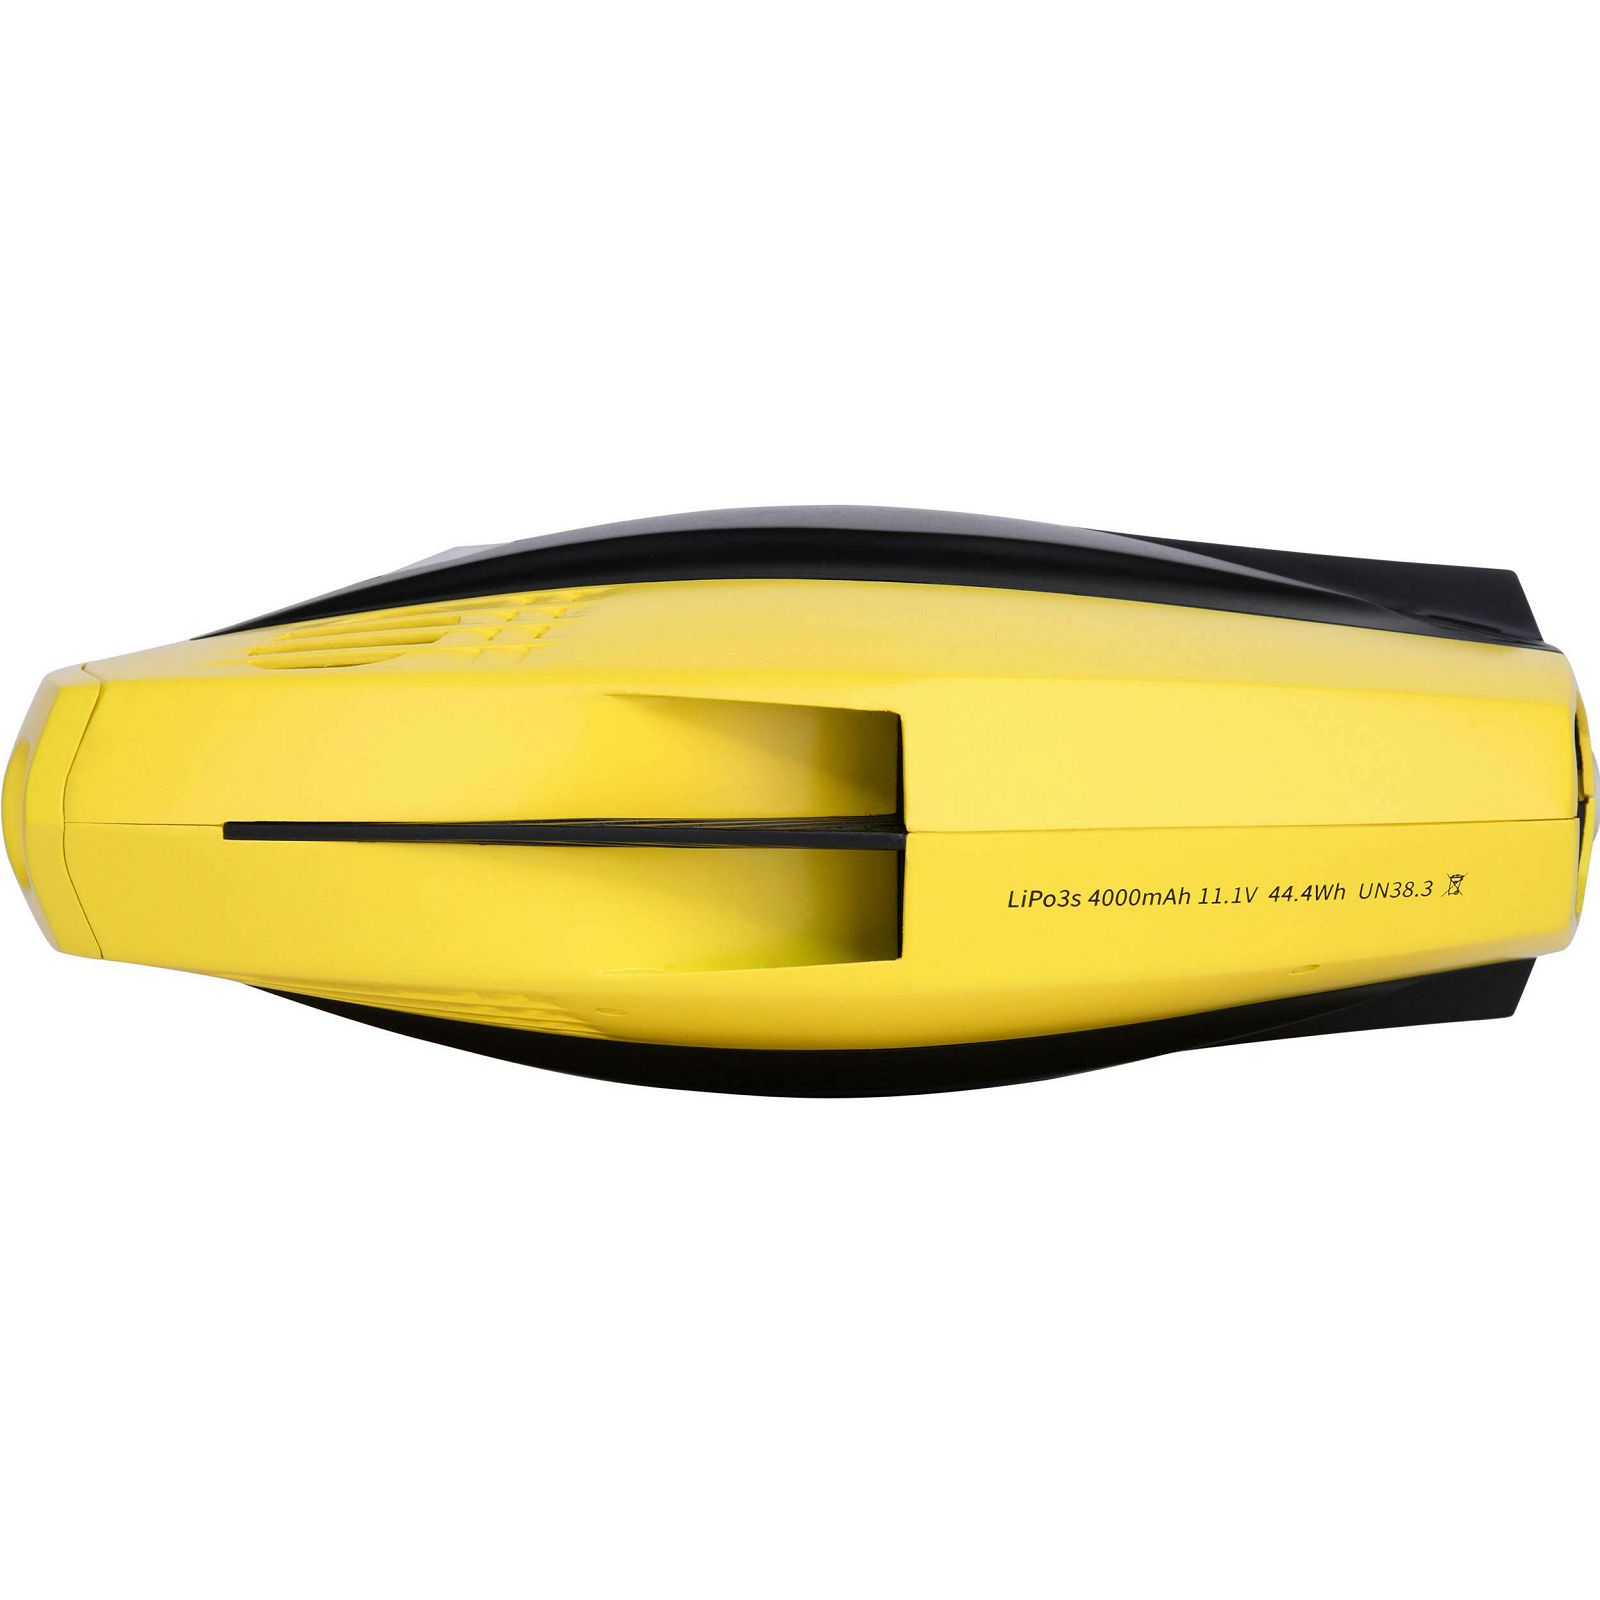 Chasing Innovation Dory Underwater drone